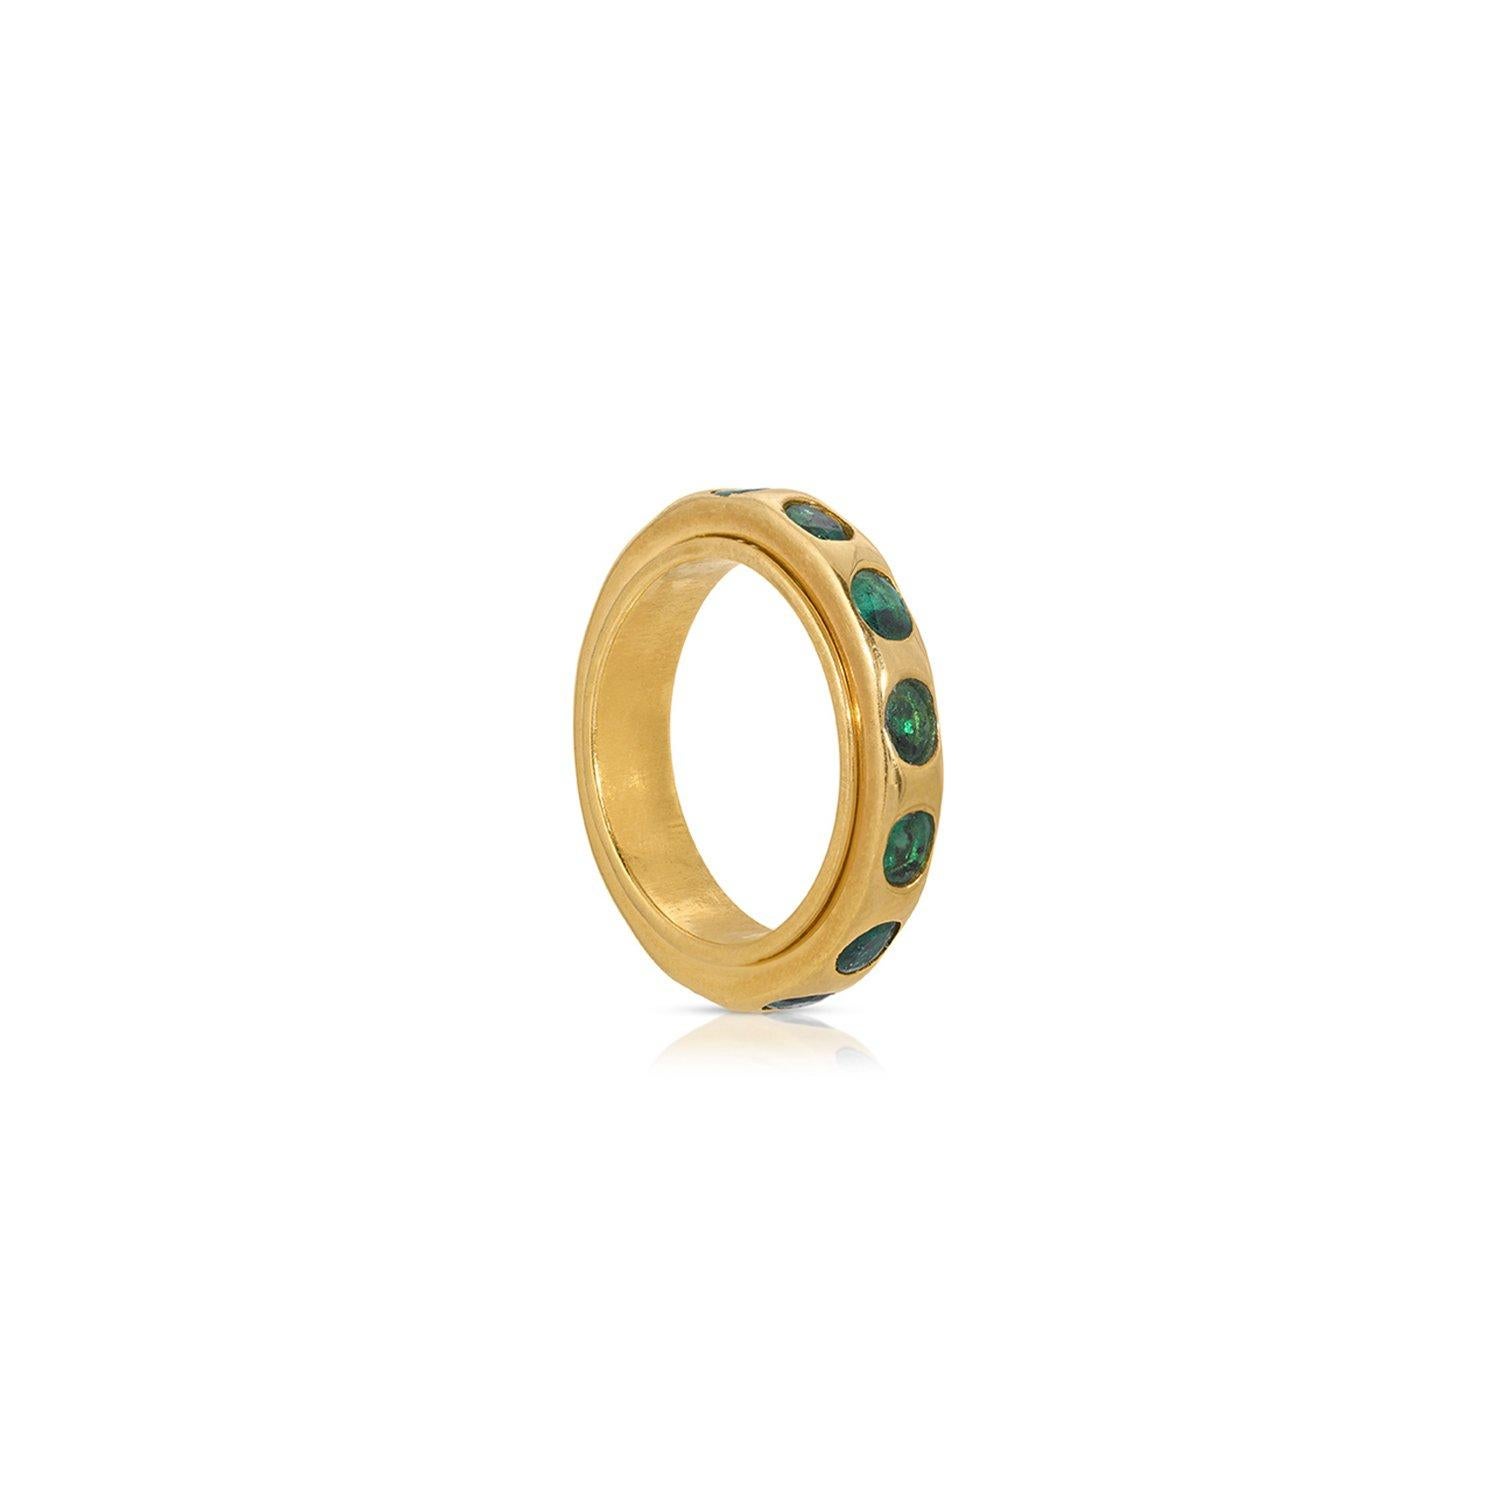 Emeralds set in a contemporary gold band featuring an outer revolving ring set with the fiery green gems.

- Natural Emeralds weight approx 1.89 Carats.
- Set in 22 Karat Gold overlay Silver.